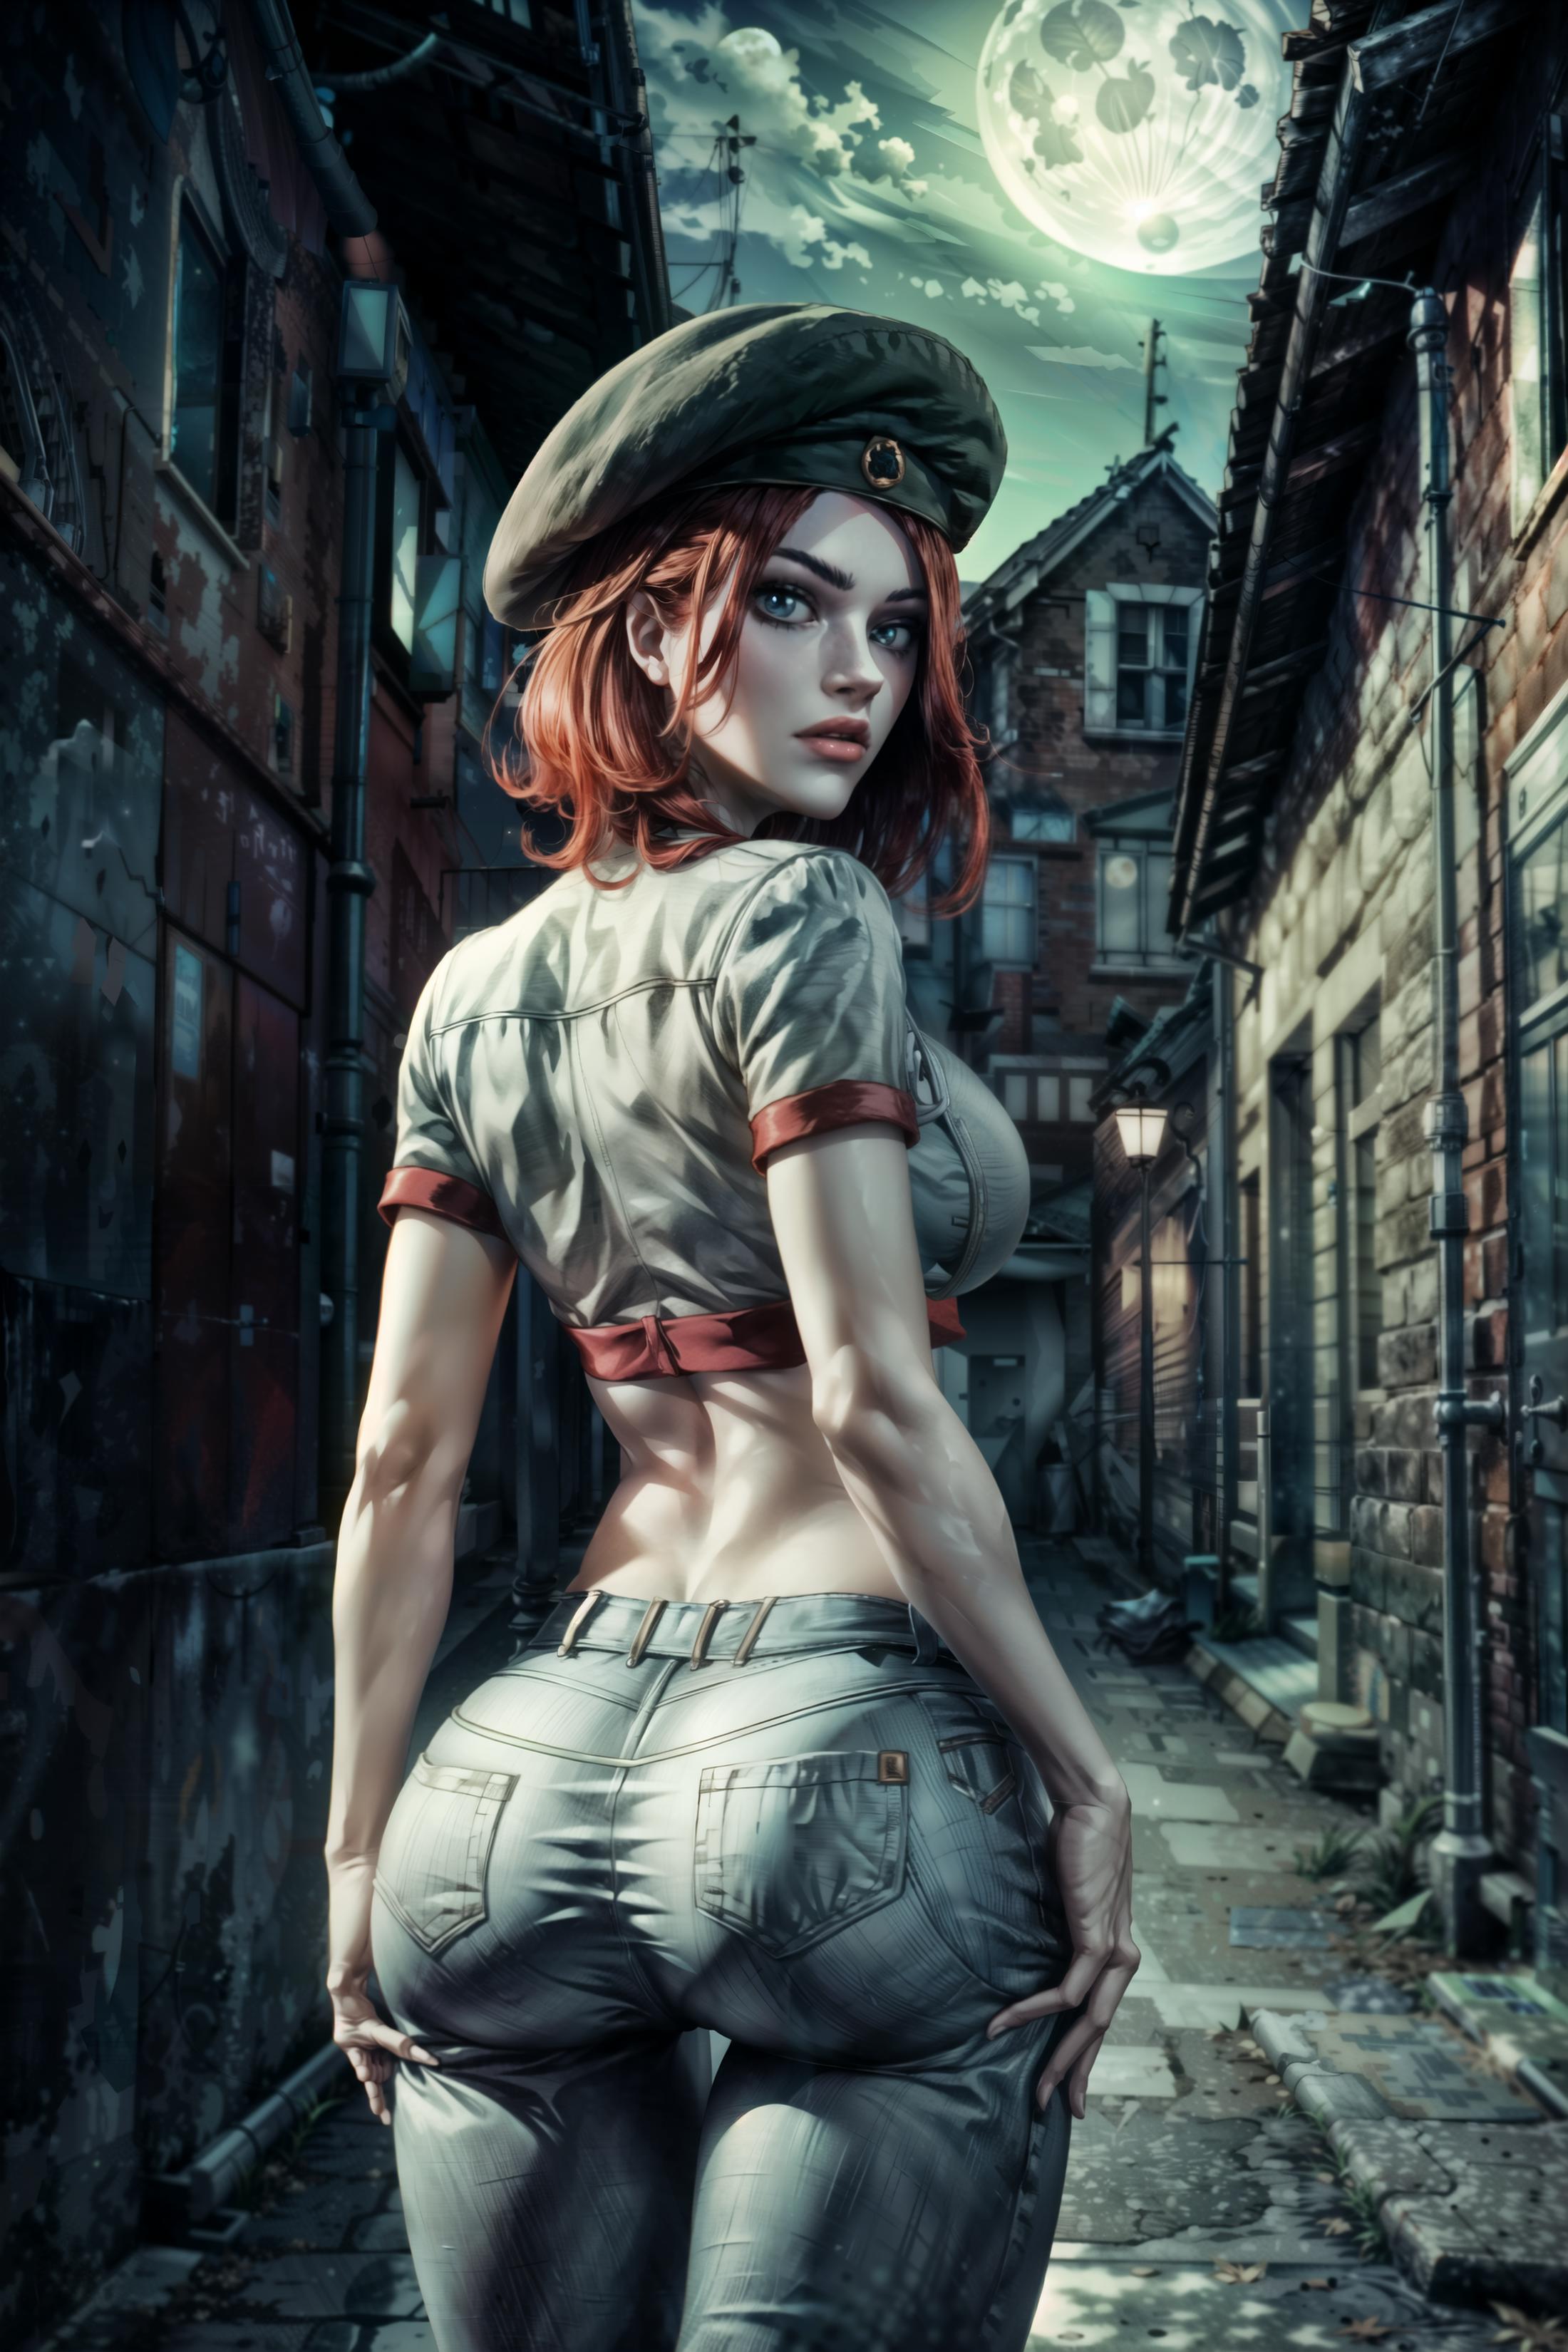 Damsel | Vampire: The Masquerade - Bloodlines image by gizgamer